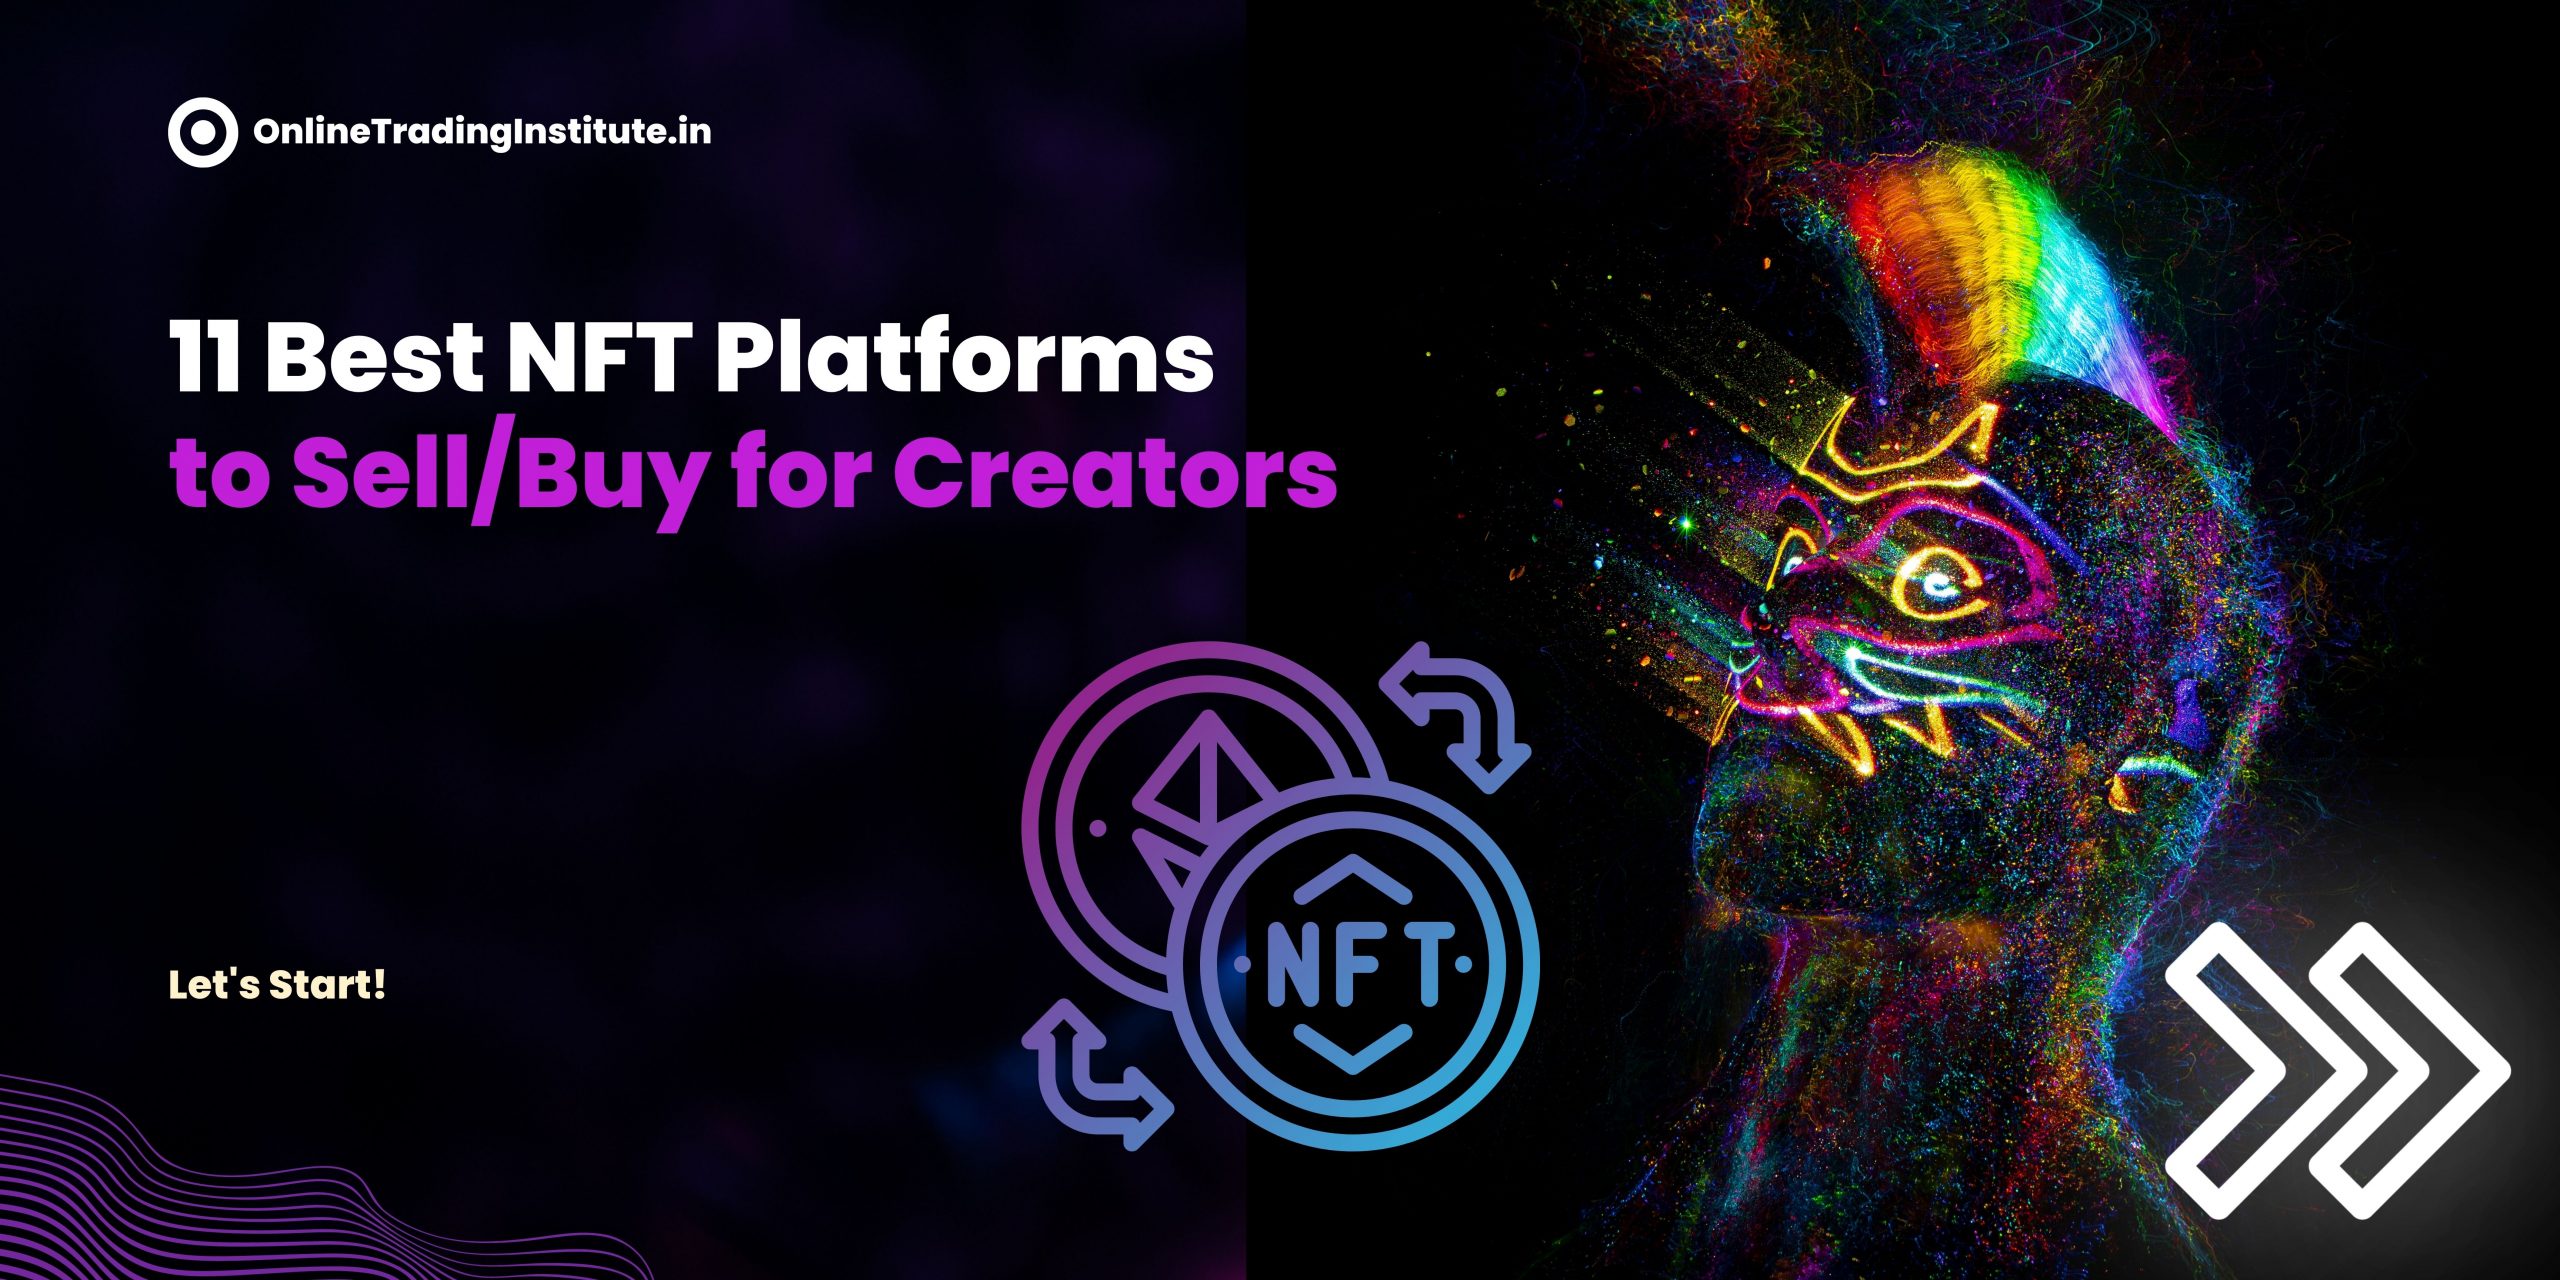 Top NFT Marketplaces for Creators to Buy/Sell NFT